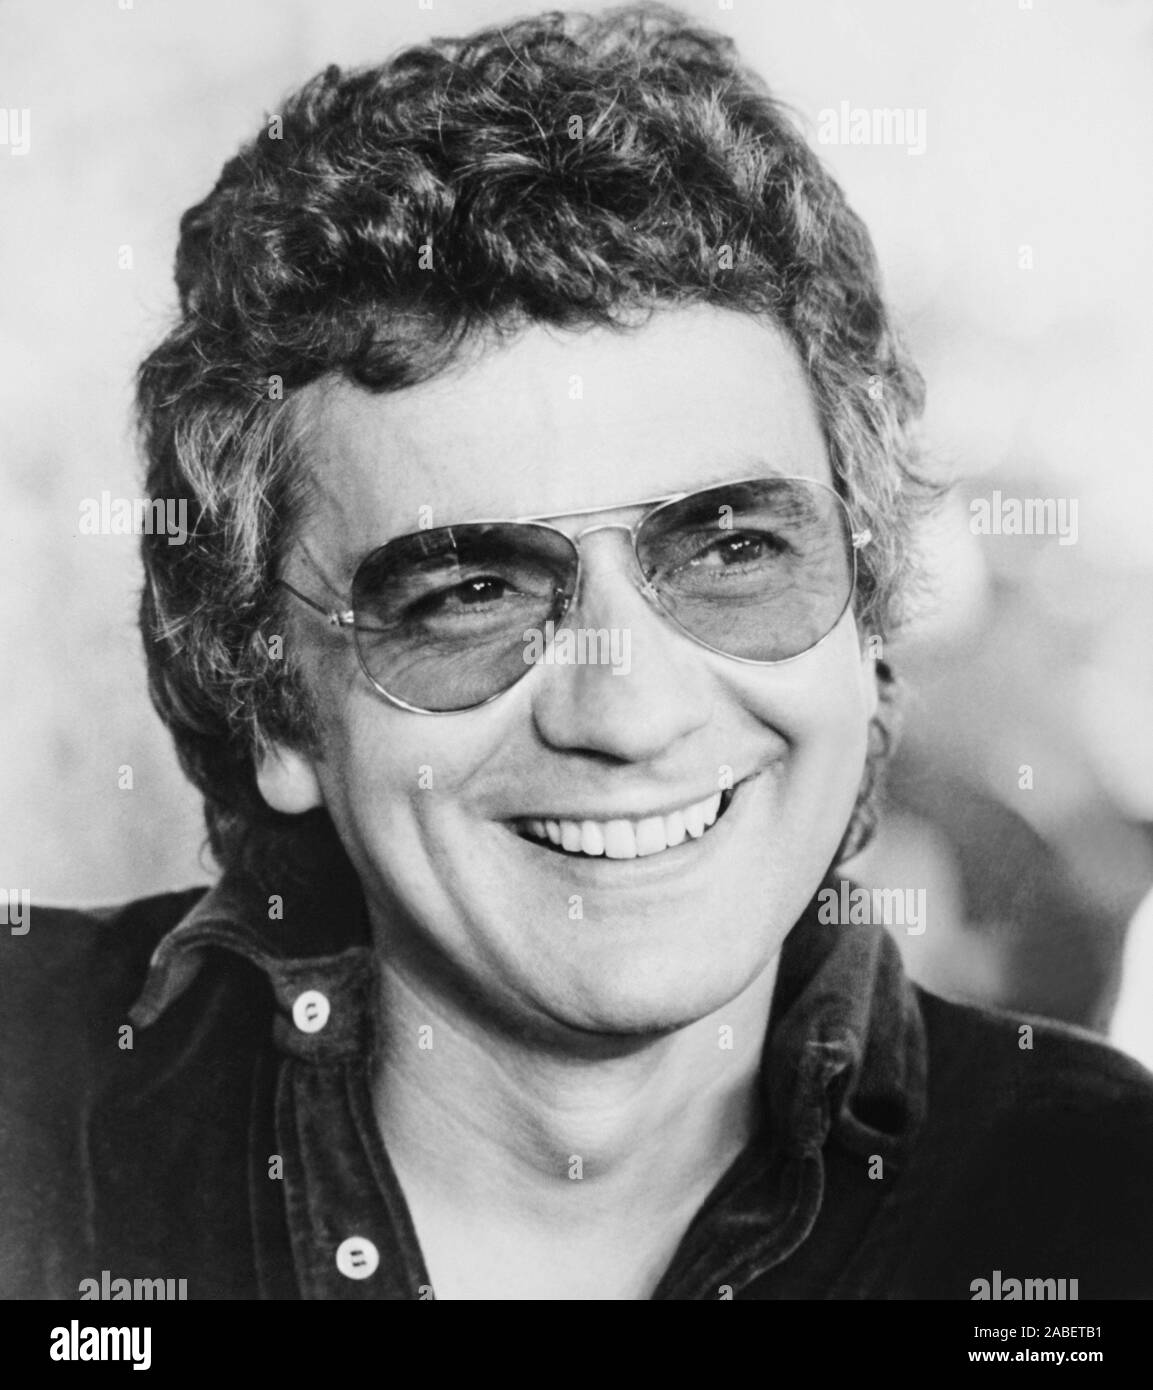 10, Dudley Moore, 1979, © Orion/courtesy Everett Collection Stock Photo